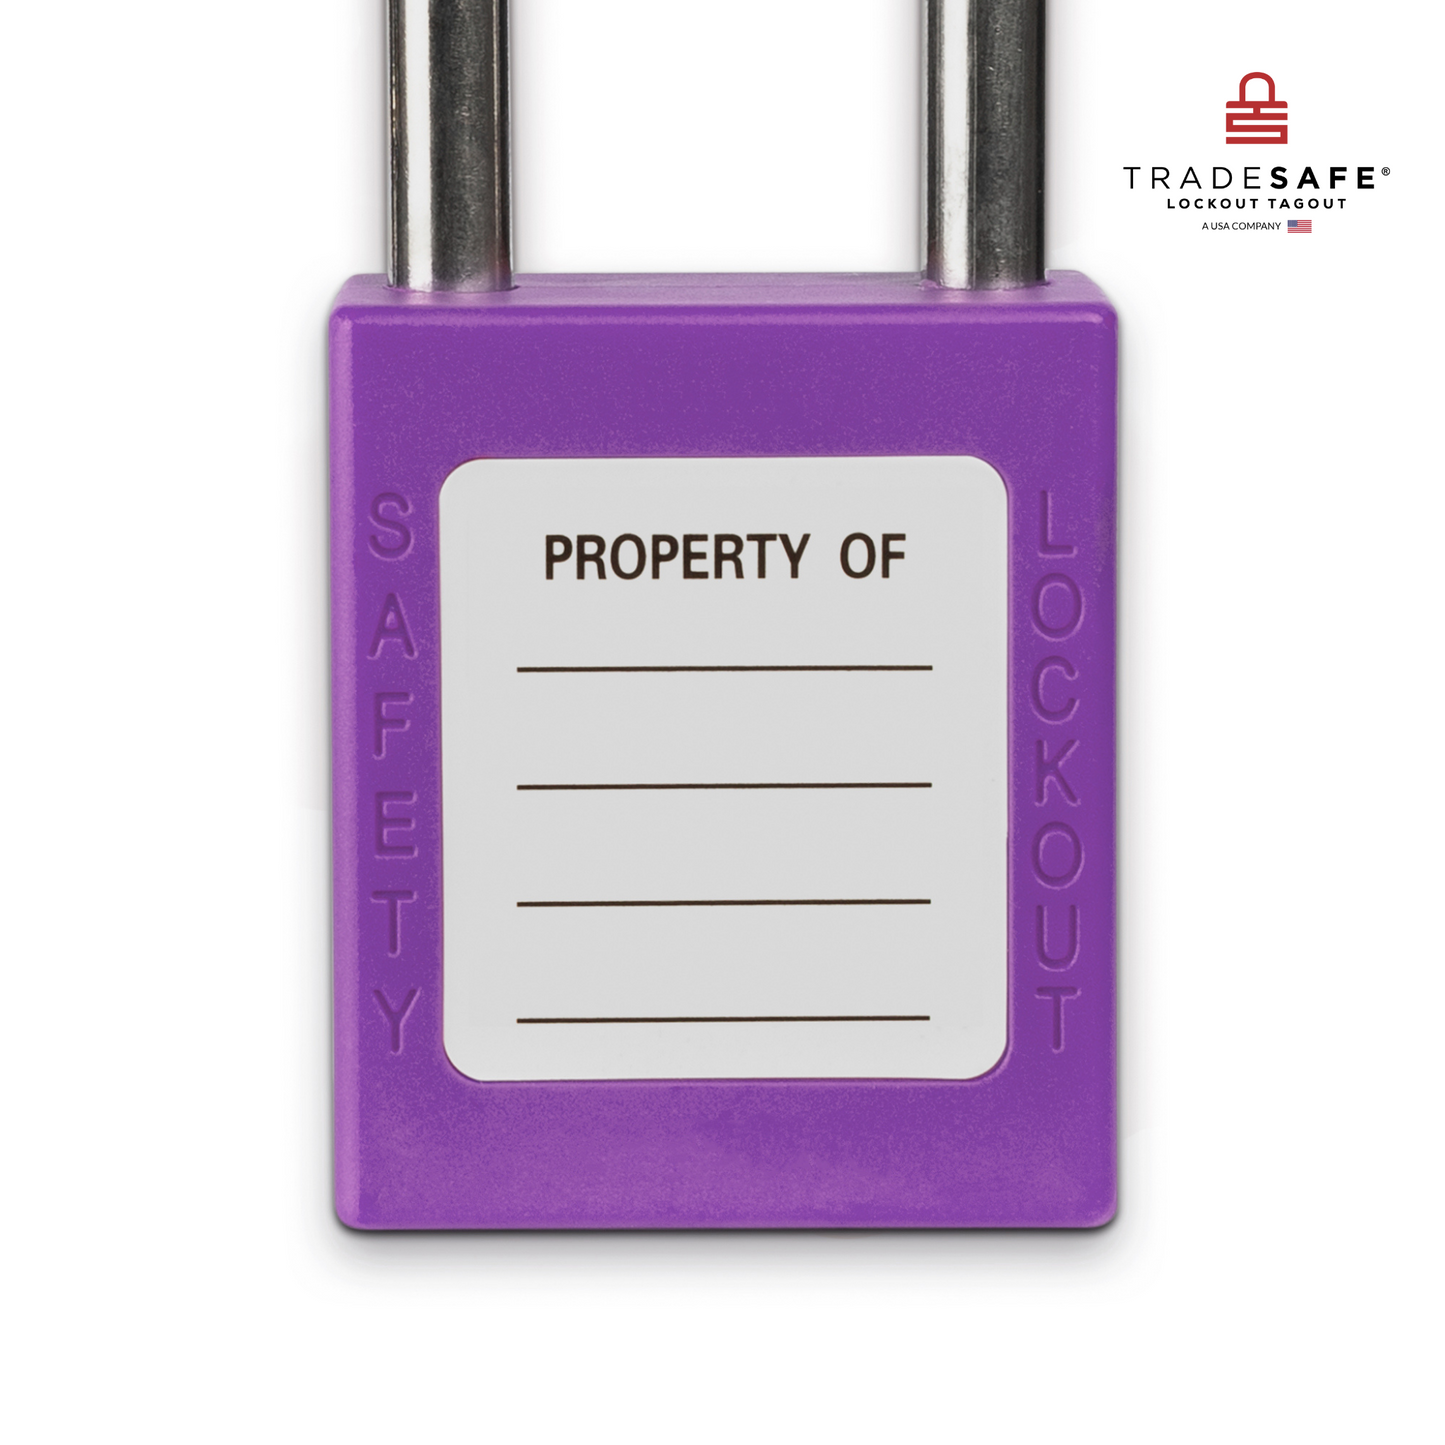 close-up view of the writable area at the back of the purple loto padlock's body 